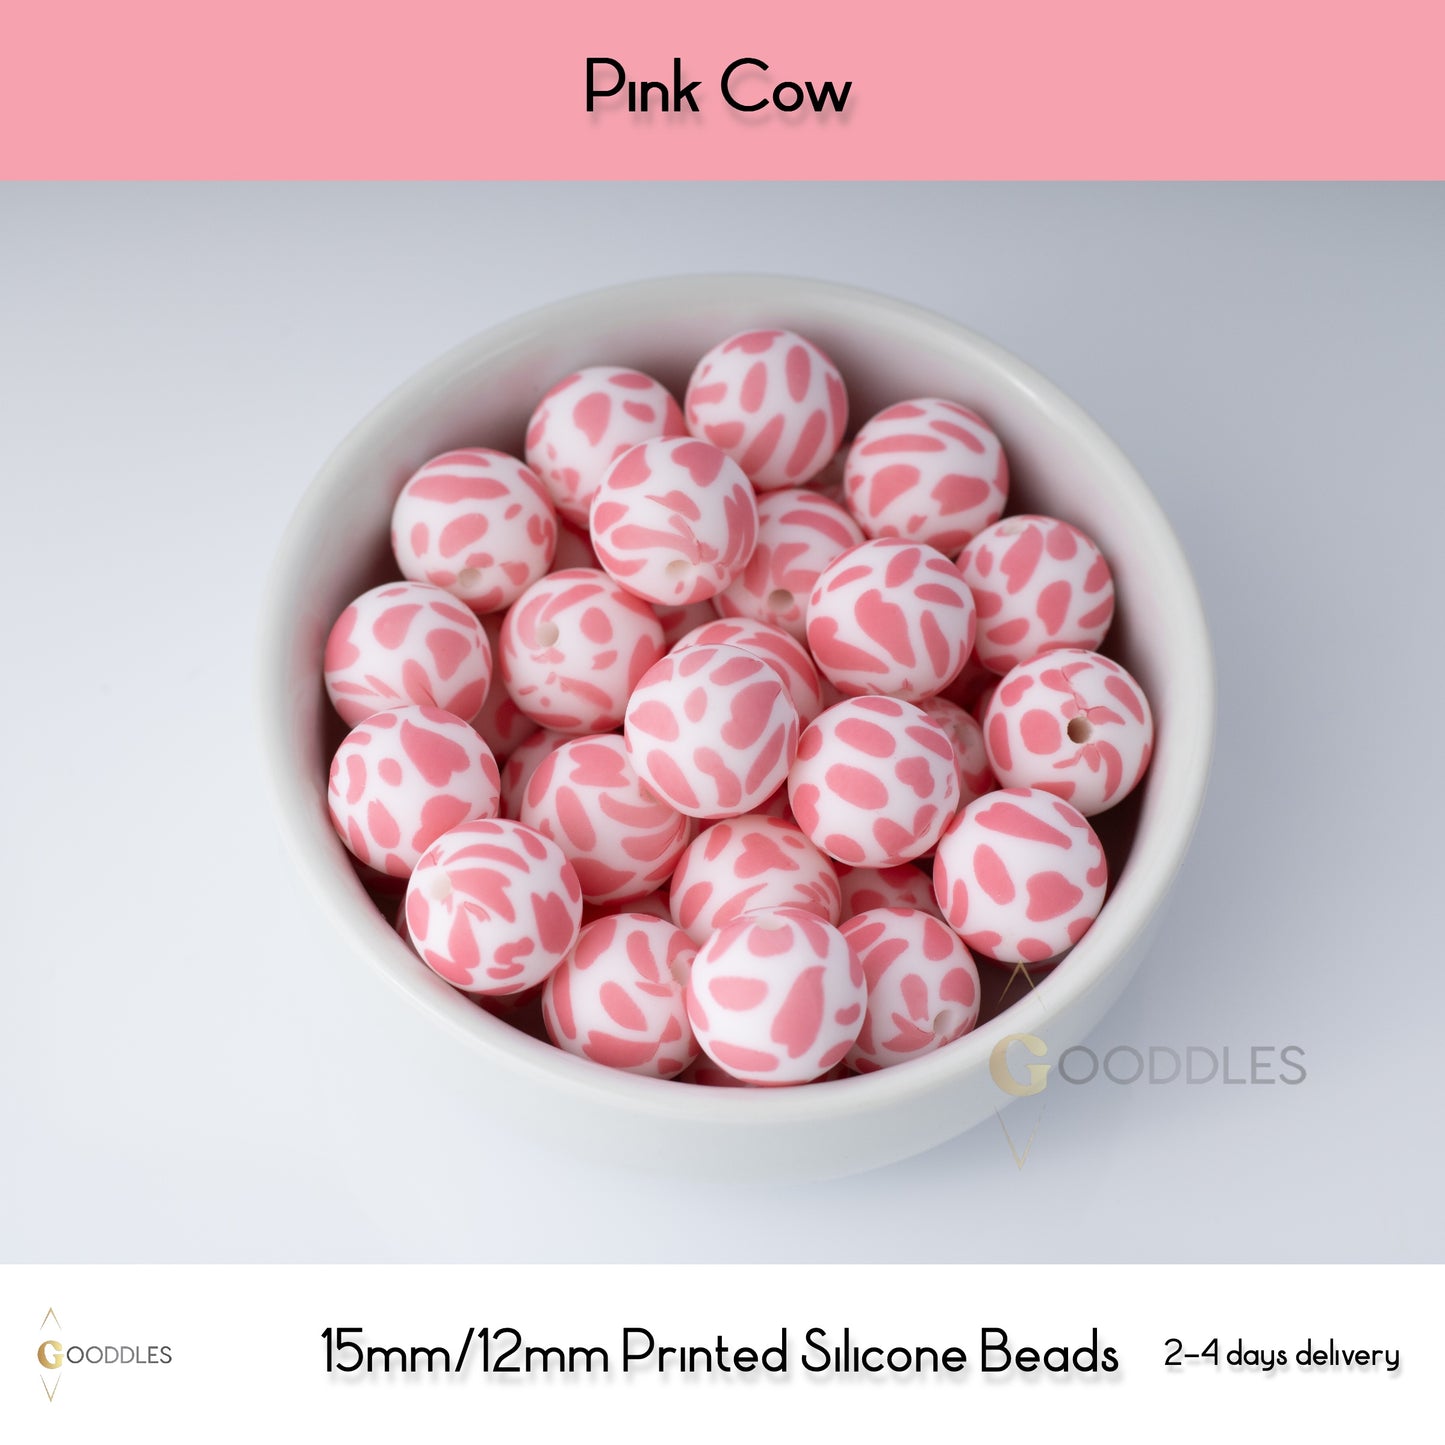 5pcs, Pink Cow Silicone Beads Printed Round Silicone Beads